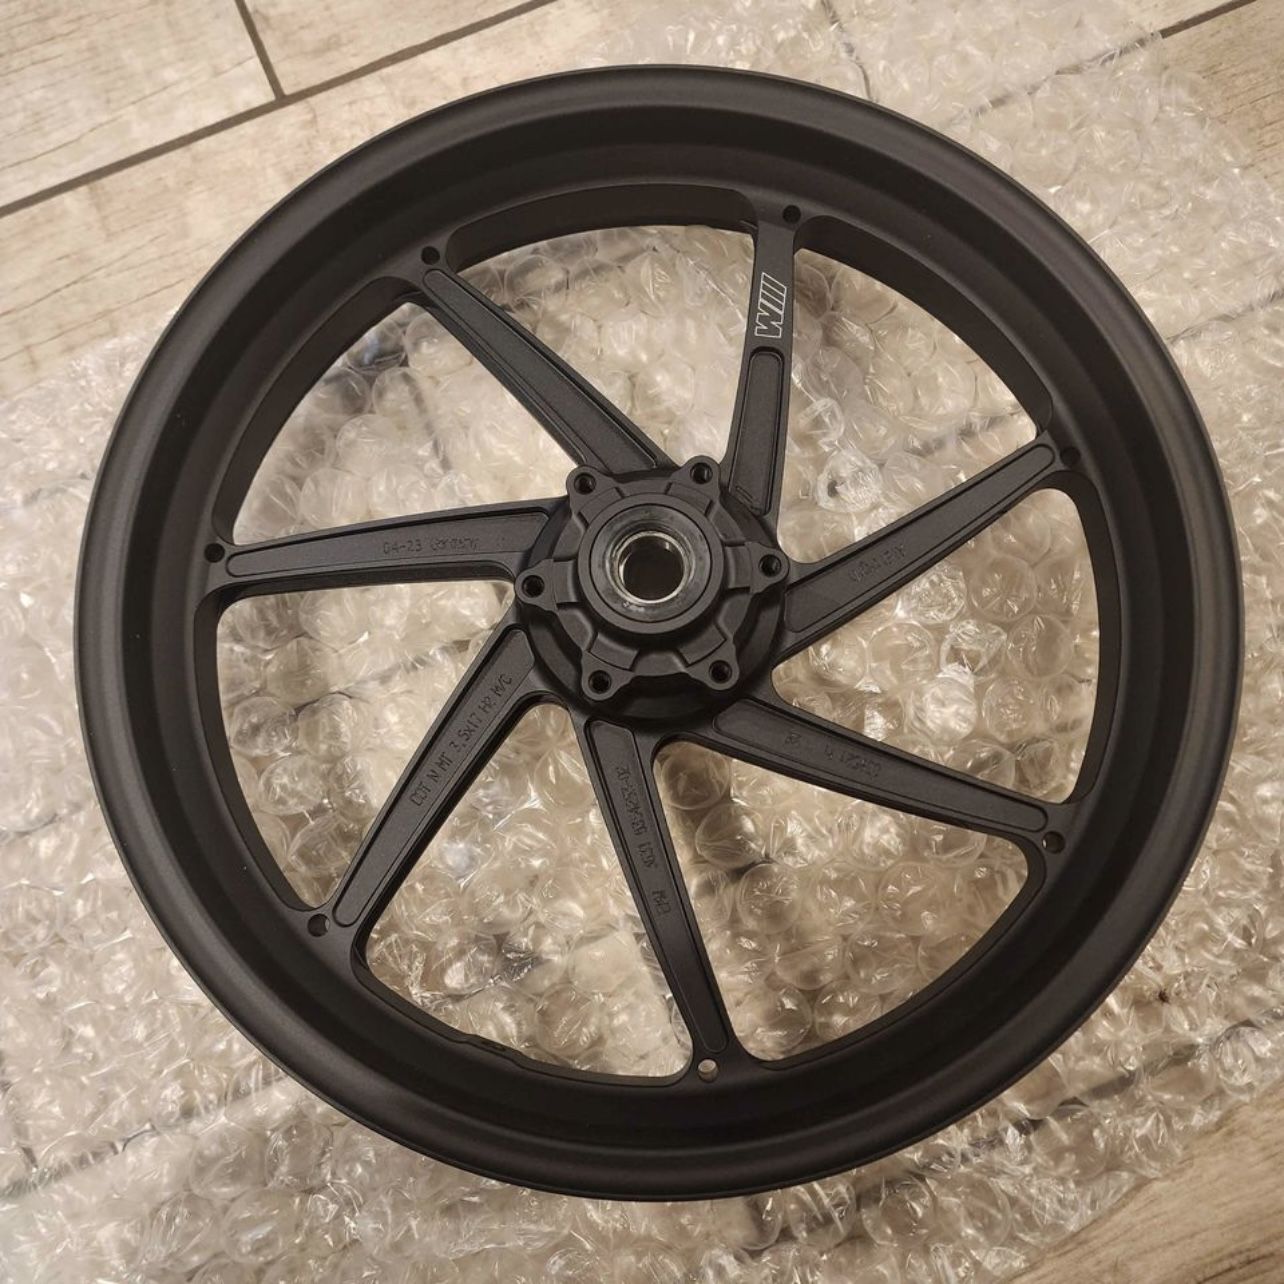 BMW S1000rr m1000rr s1000r m1000r forged front wheel